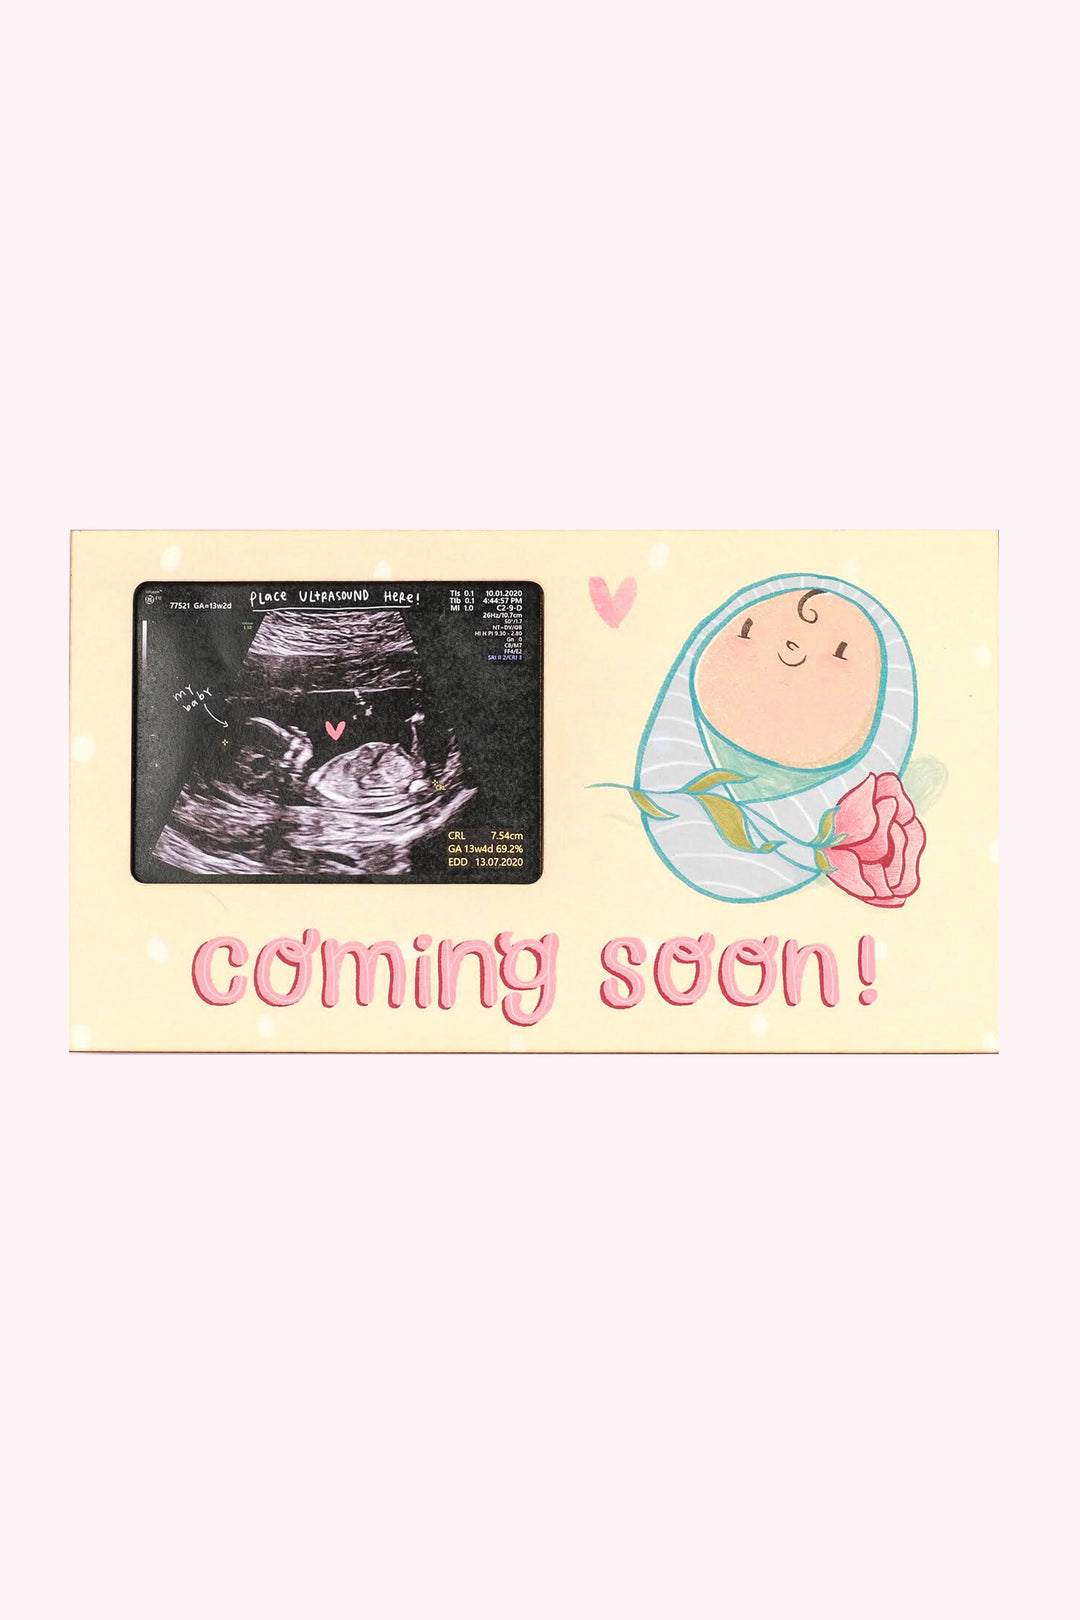 Coming Soon Photo Frame